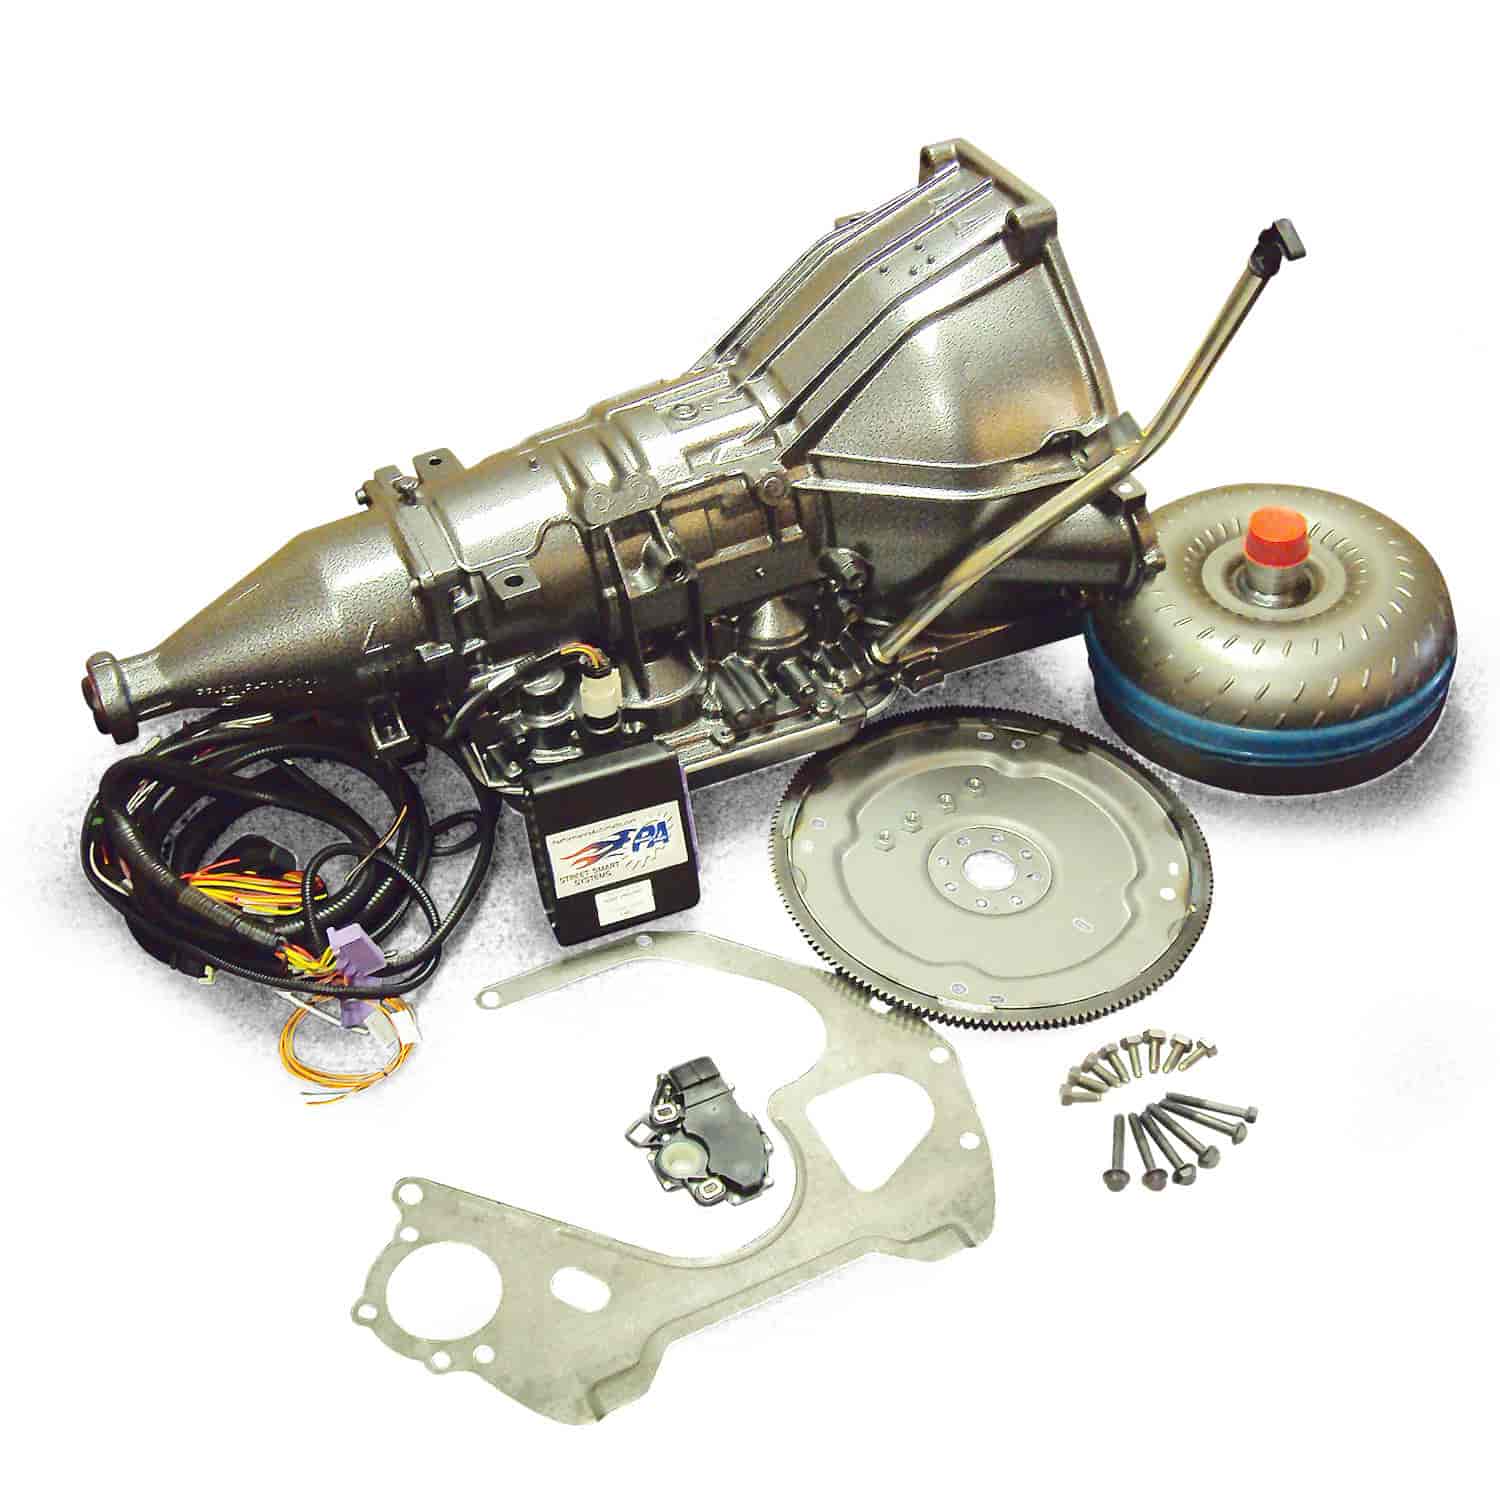 Blue Chip Street Smart 4R70W Transmission Package for Ford Coyote